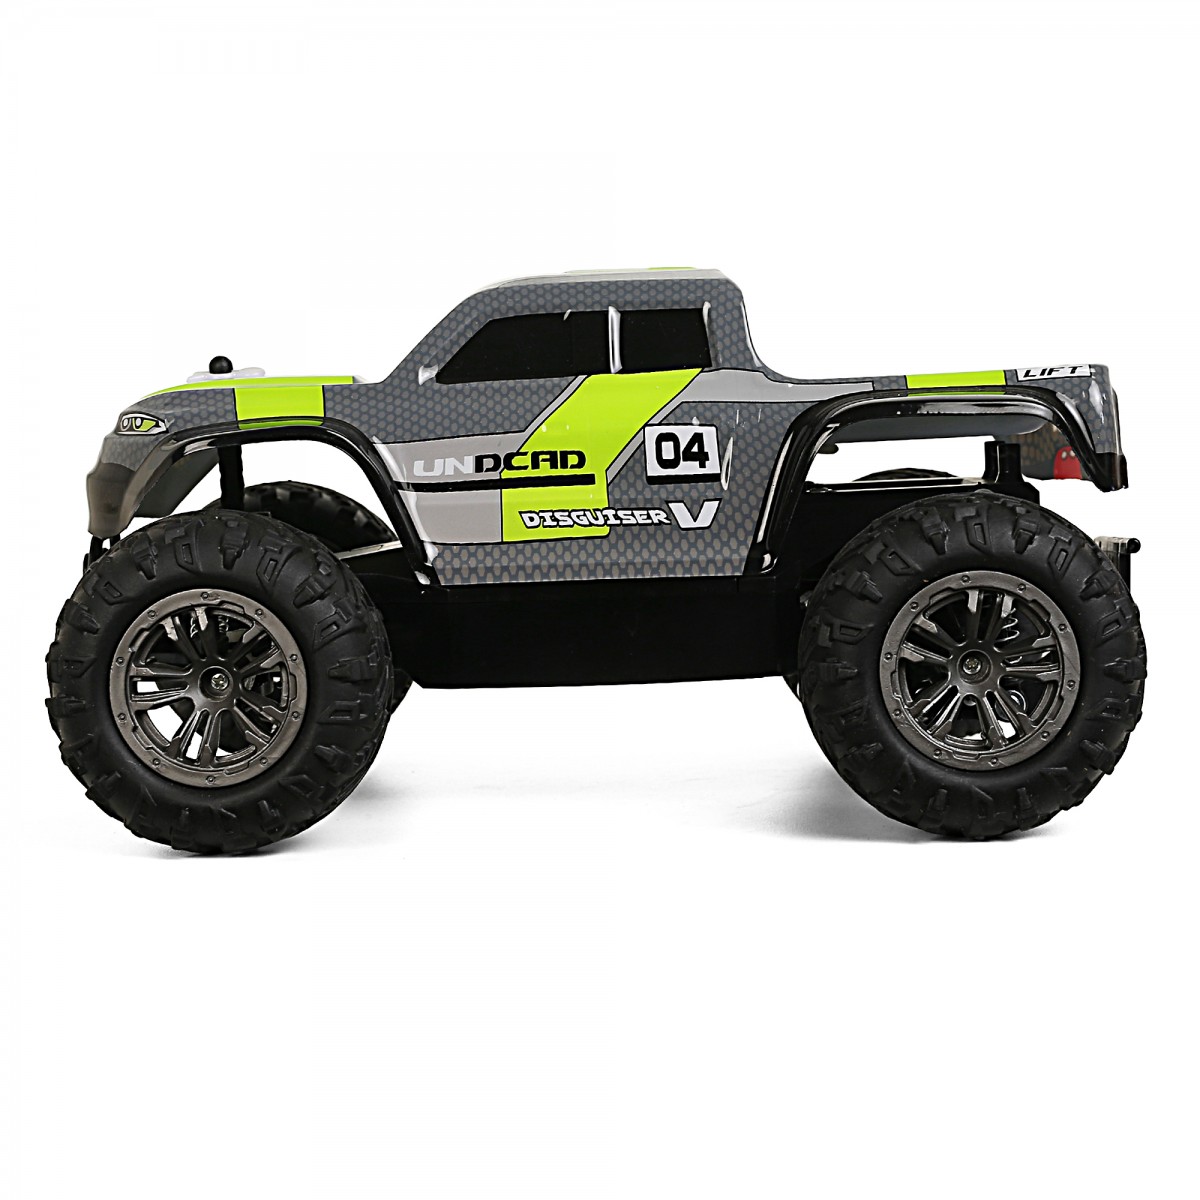 Ralleyz High Speed Undcad Off Roader Stunt Racer, RC Rock Crawler Vehicle, Scale 1:18 High Speed Remote Control Monster Off Roader, Kids for 6Y+, Grey